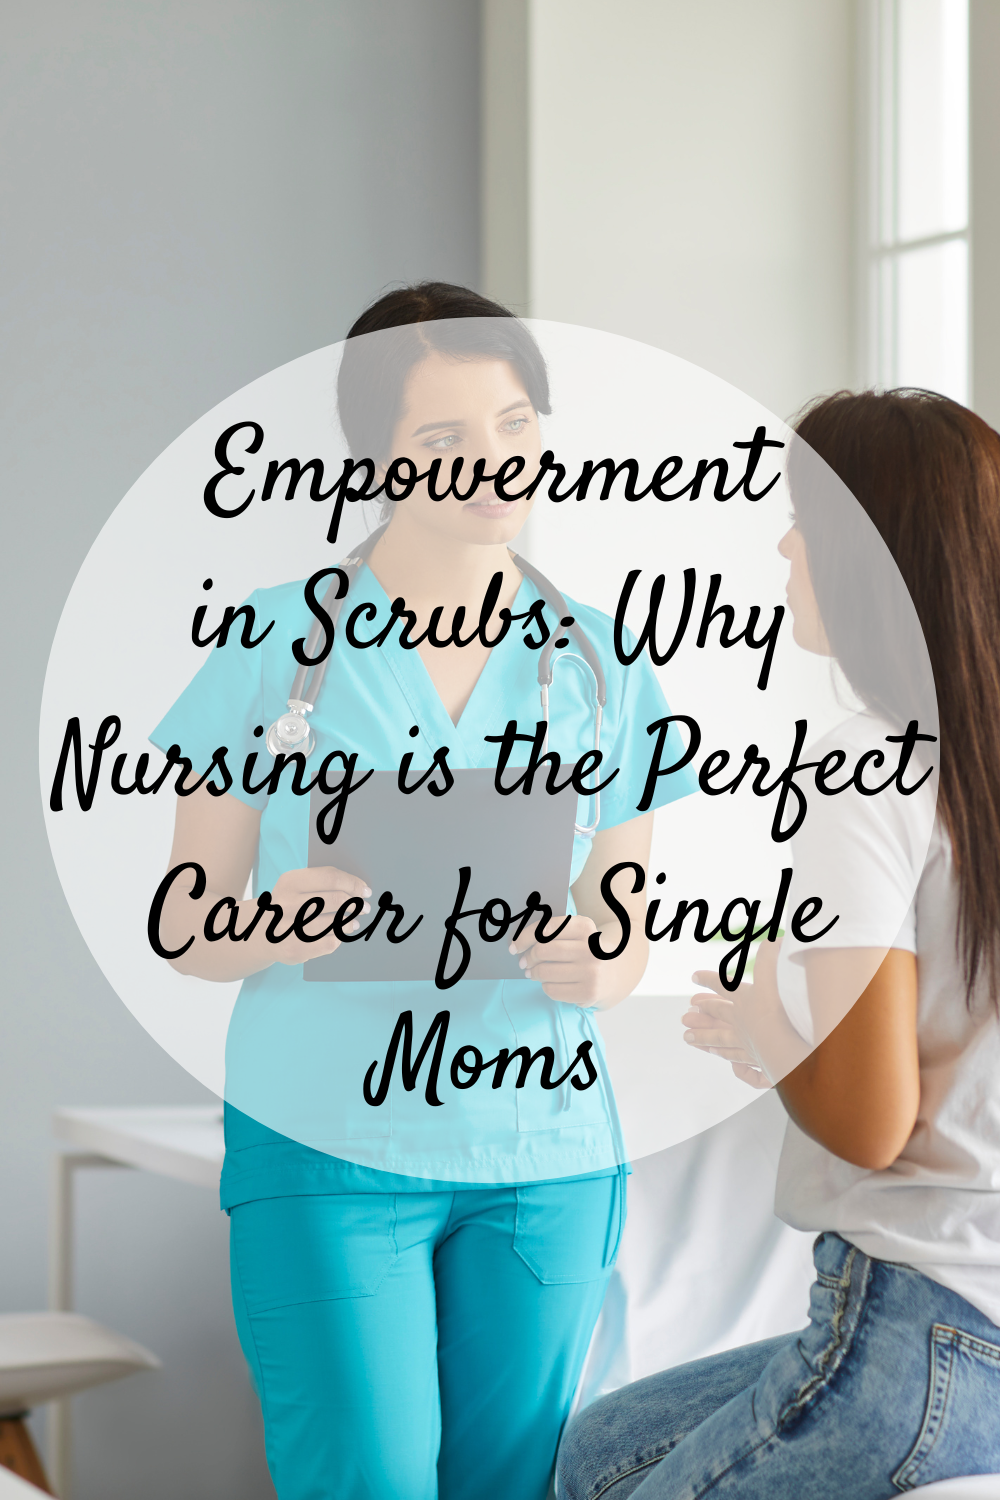 Empowerment in Scrubs: Why Nursing is the Perfect Career for Single Moms